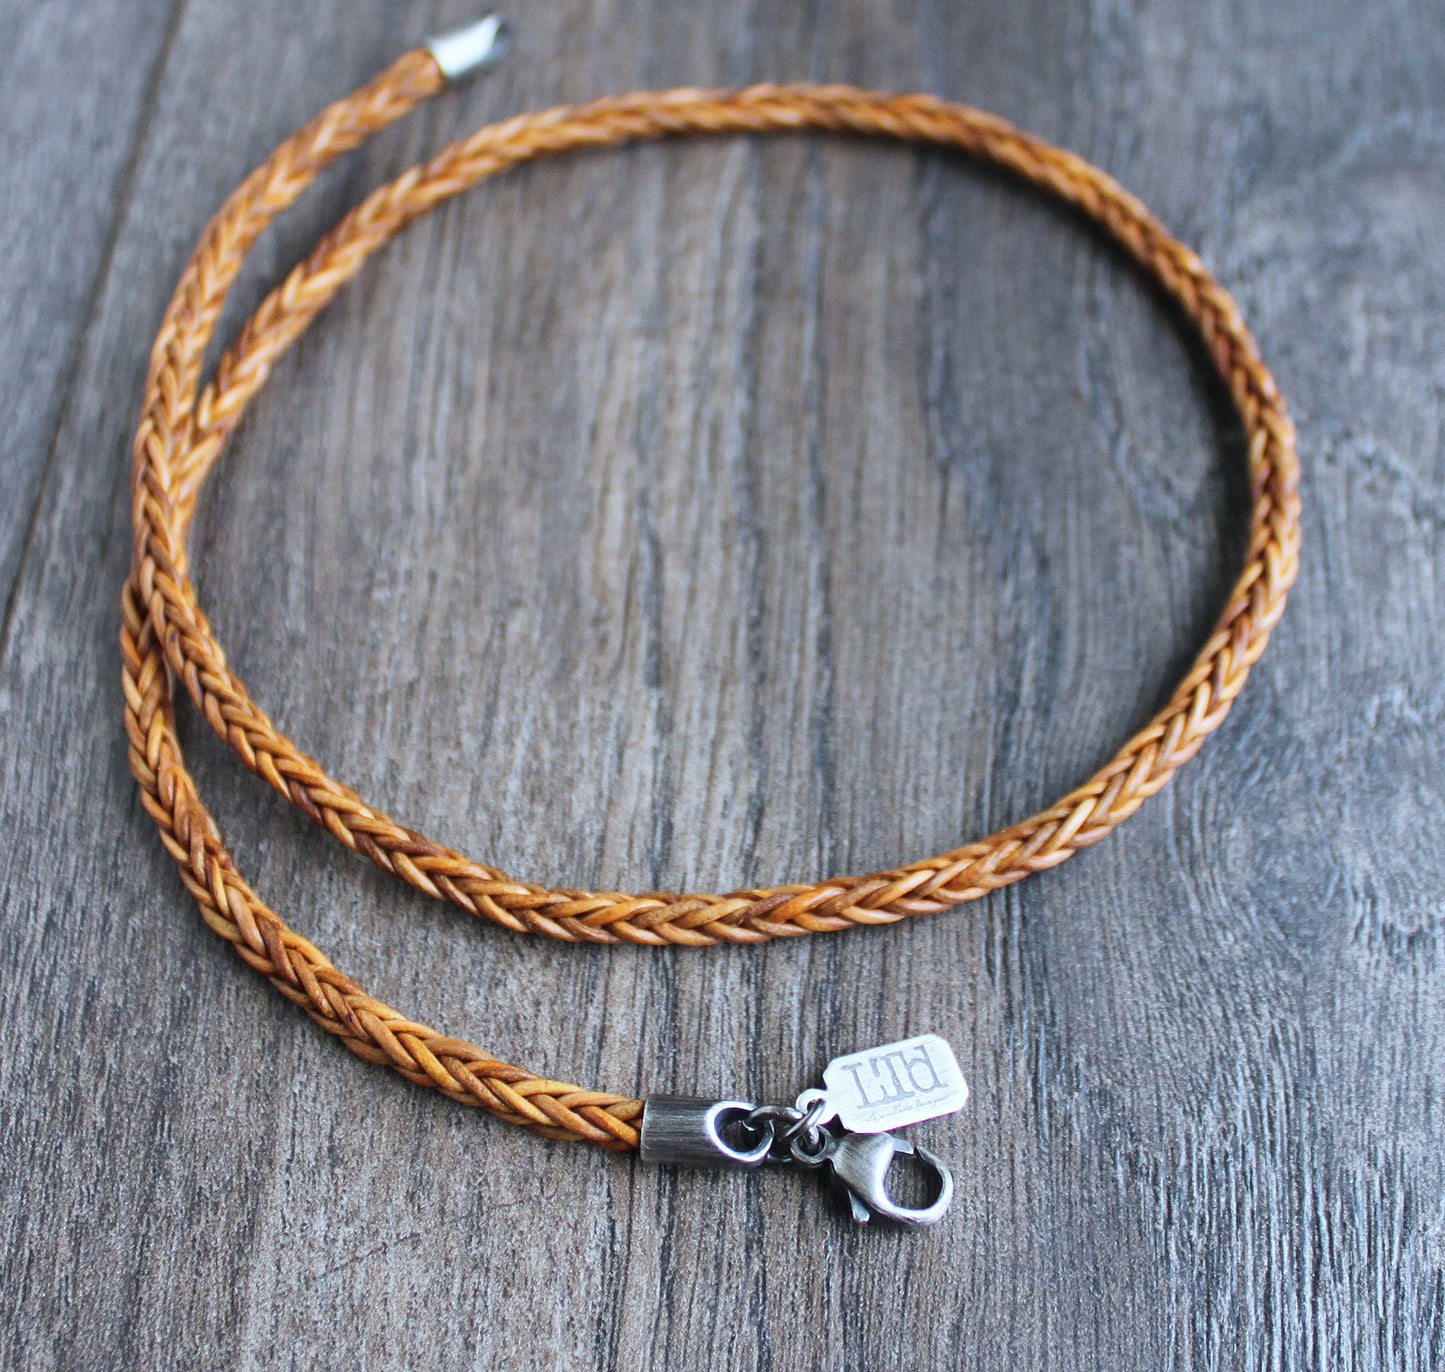 Men's Square Braid Light Brown Leather Necklace 22 Inches